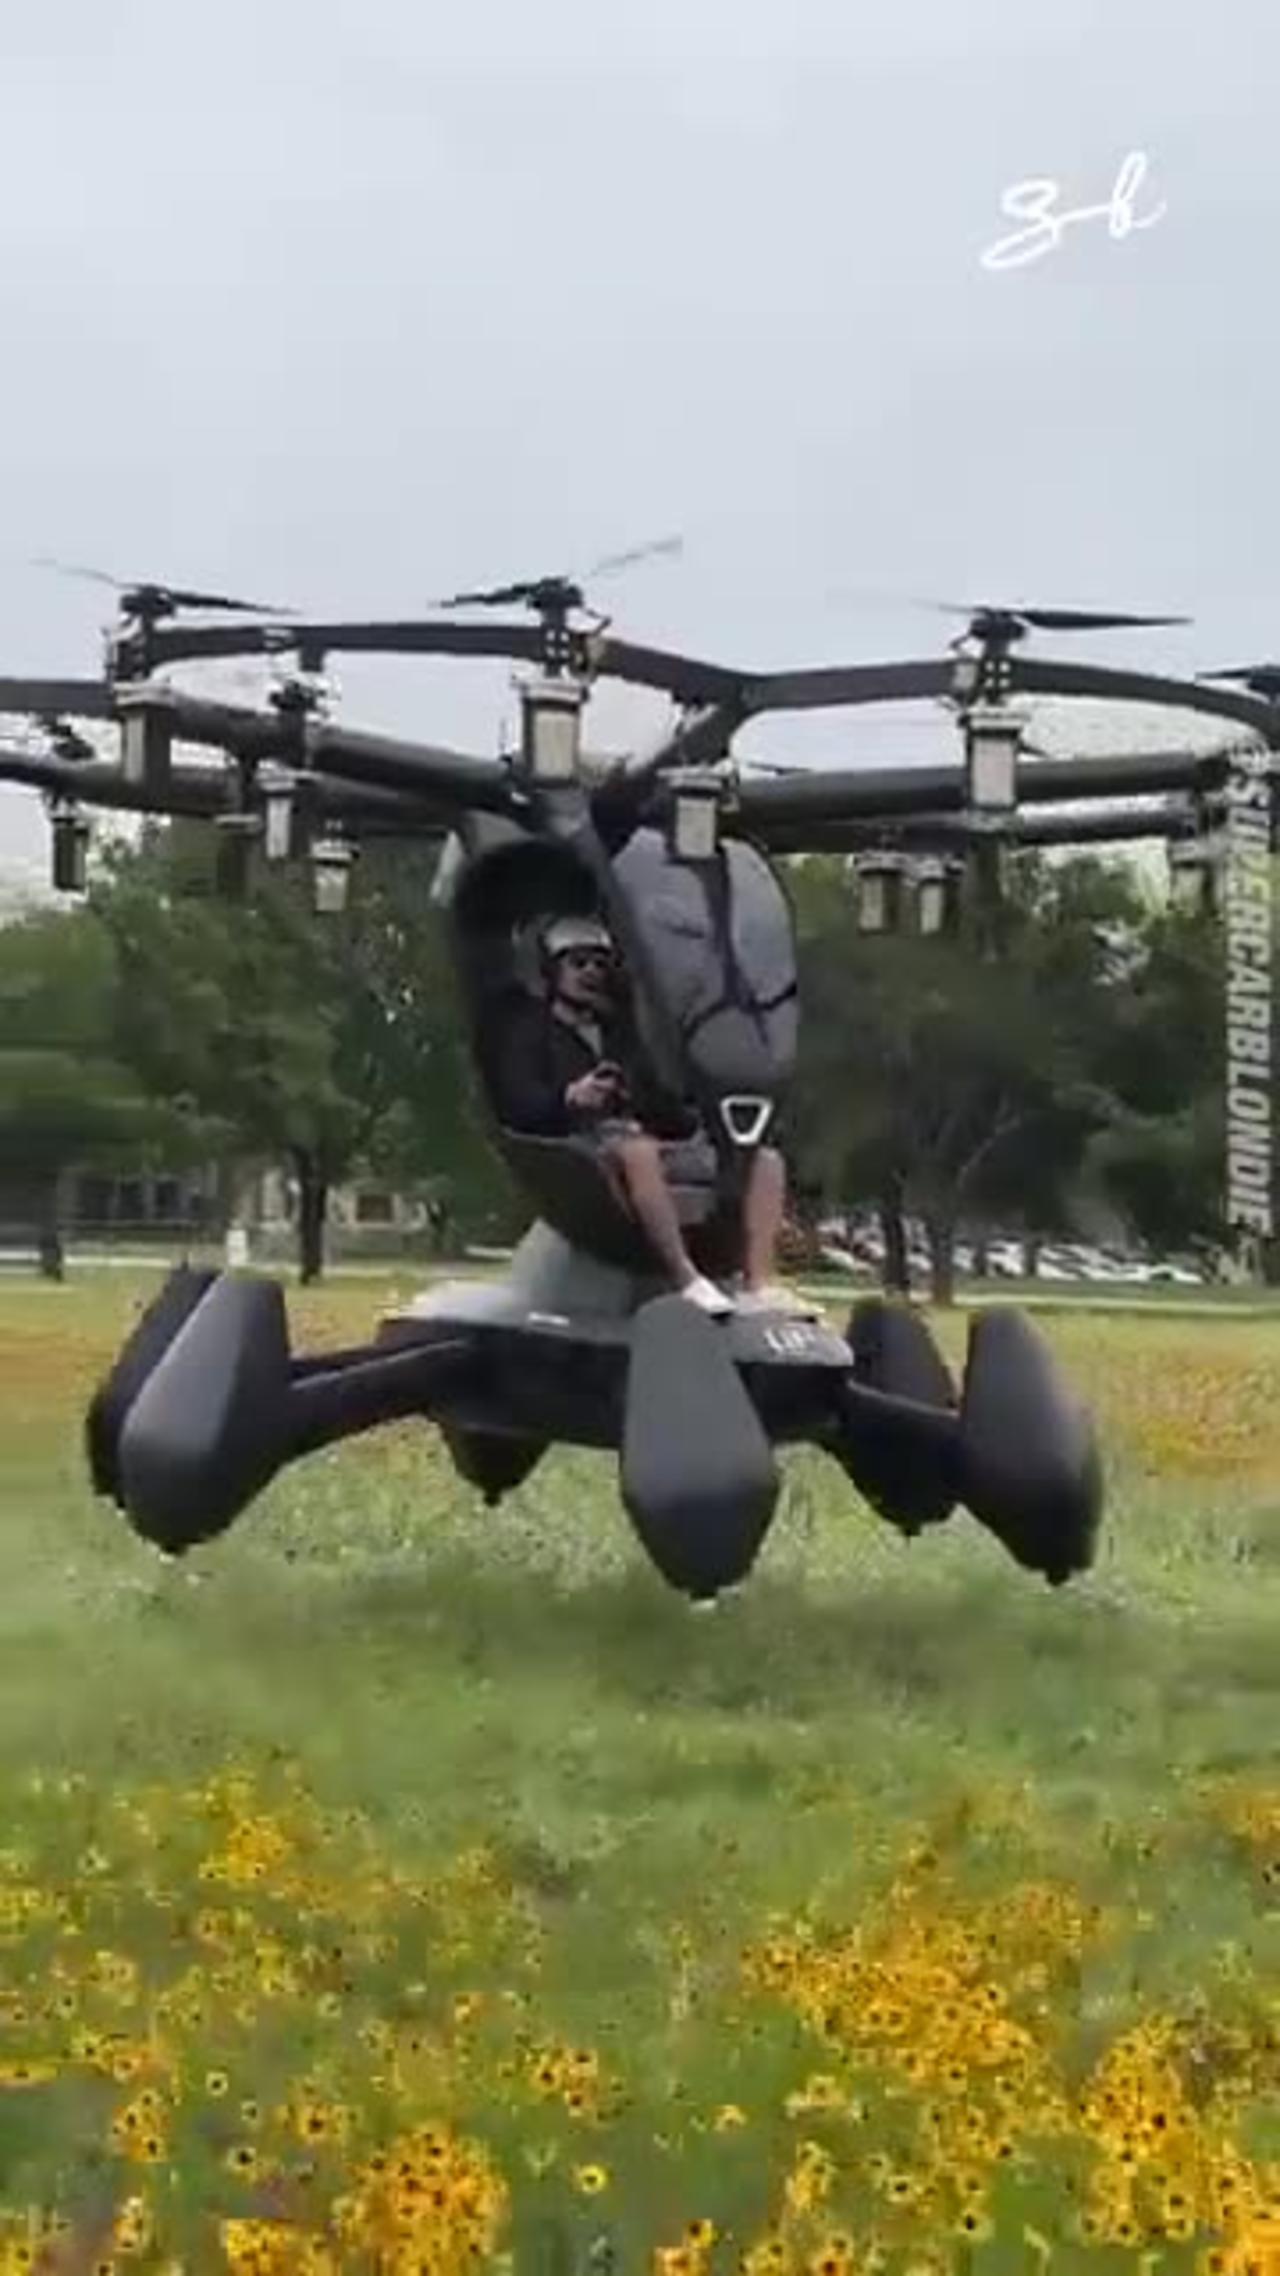 This is a big drone